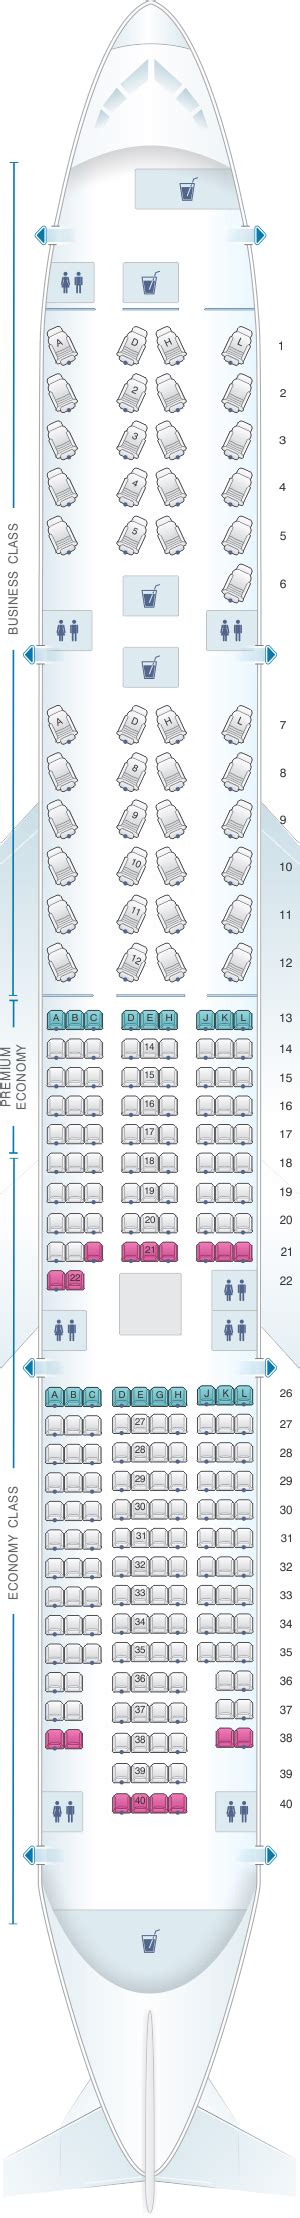 American Airlines Boeing 777 200 Retrofit 2 772 Seat Map E6F